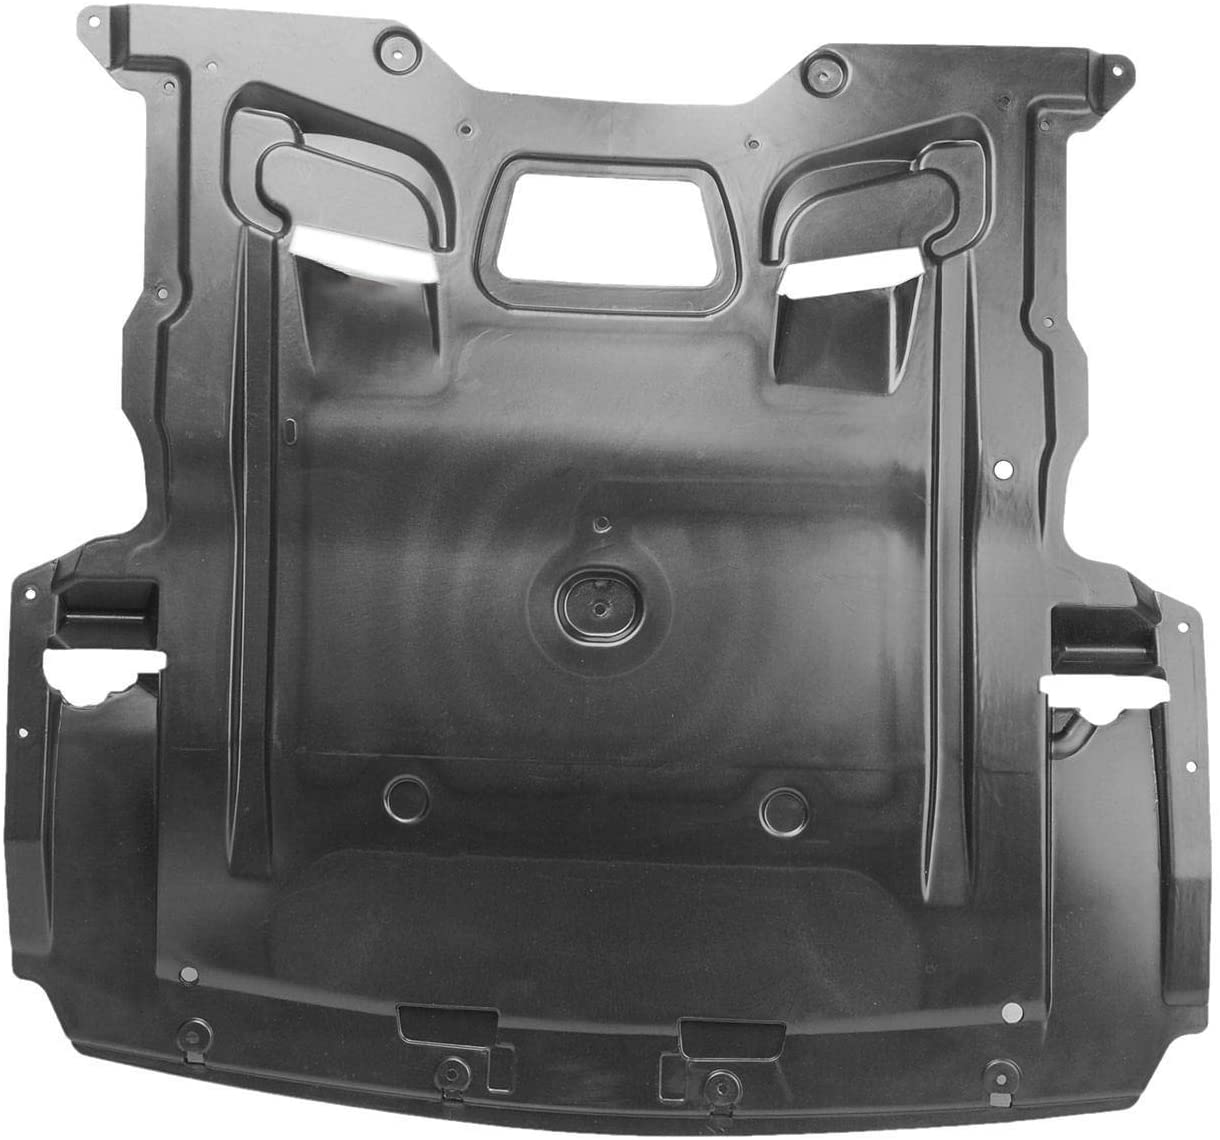 Aftermarket UNDER ENGINE COVERS for BMW - 750I, 750i,09-15,Lower engine cover